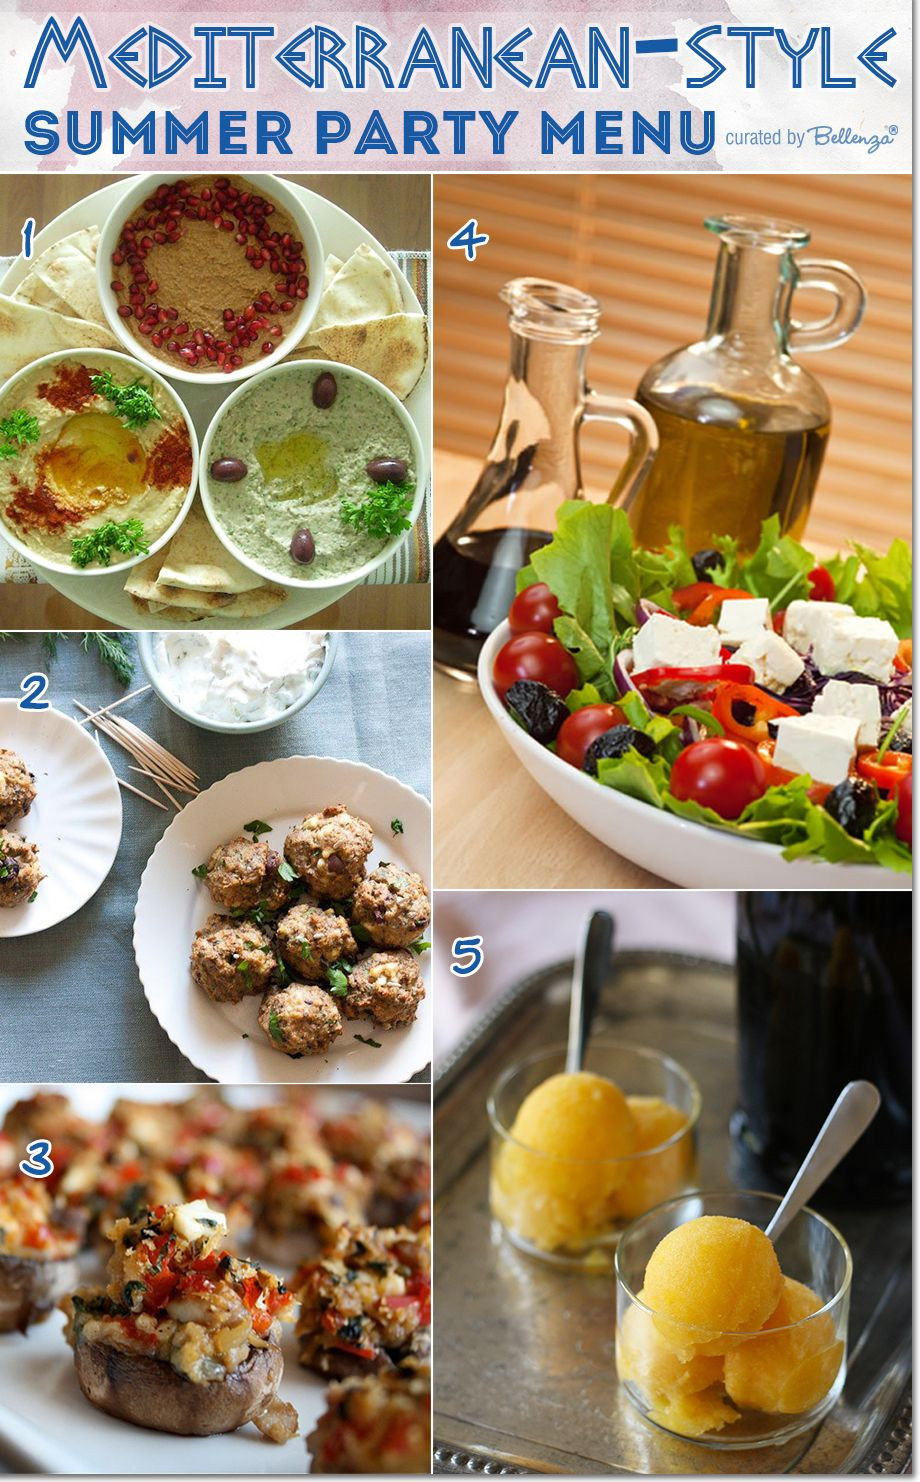 Summer Dinner Party Recipes Ideas
 Menu Ideas for Hosting a Mediterranean style Summer Party